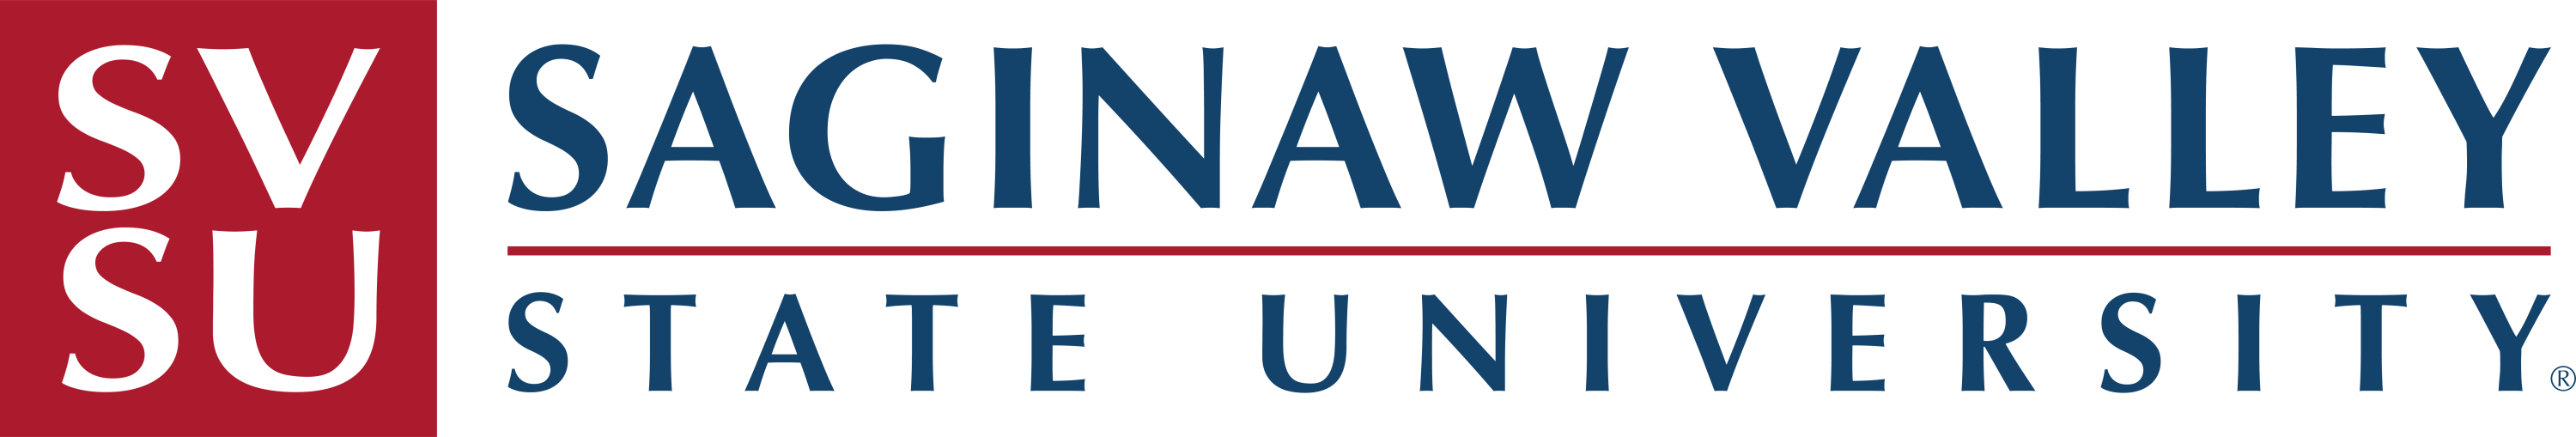 Saginaw Valley State University College of Science, Engineering & Technology Image